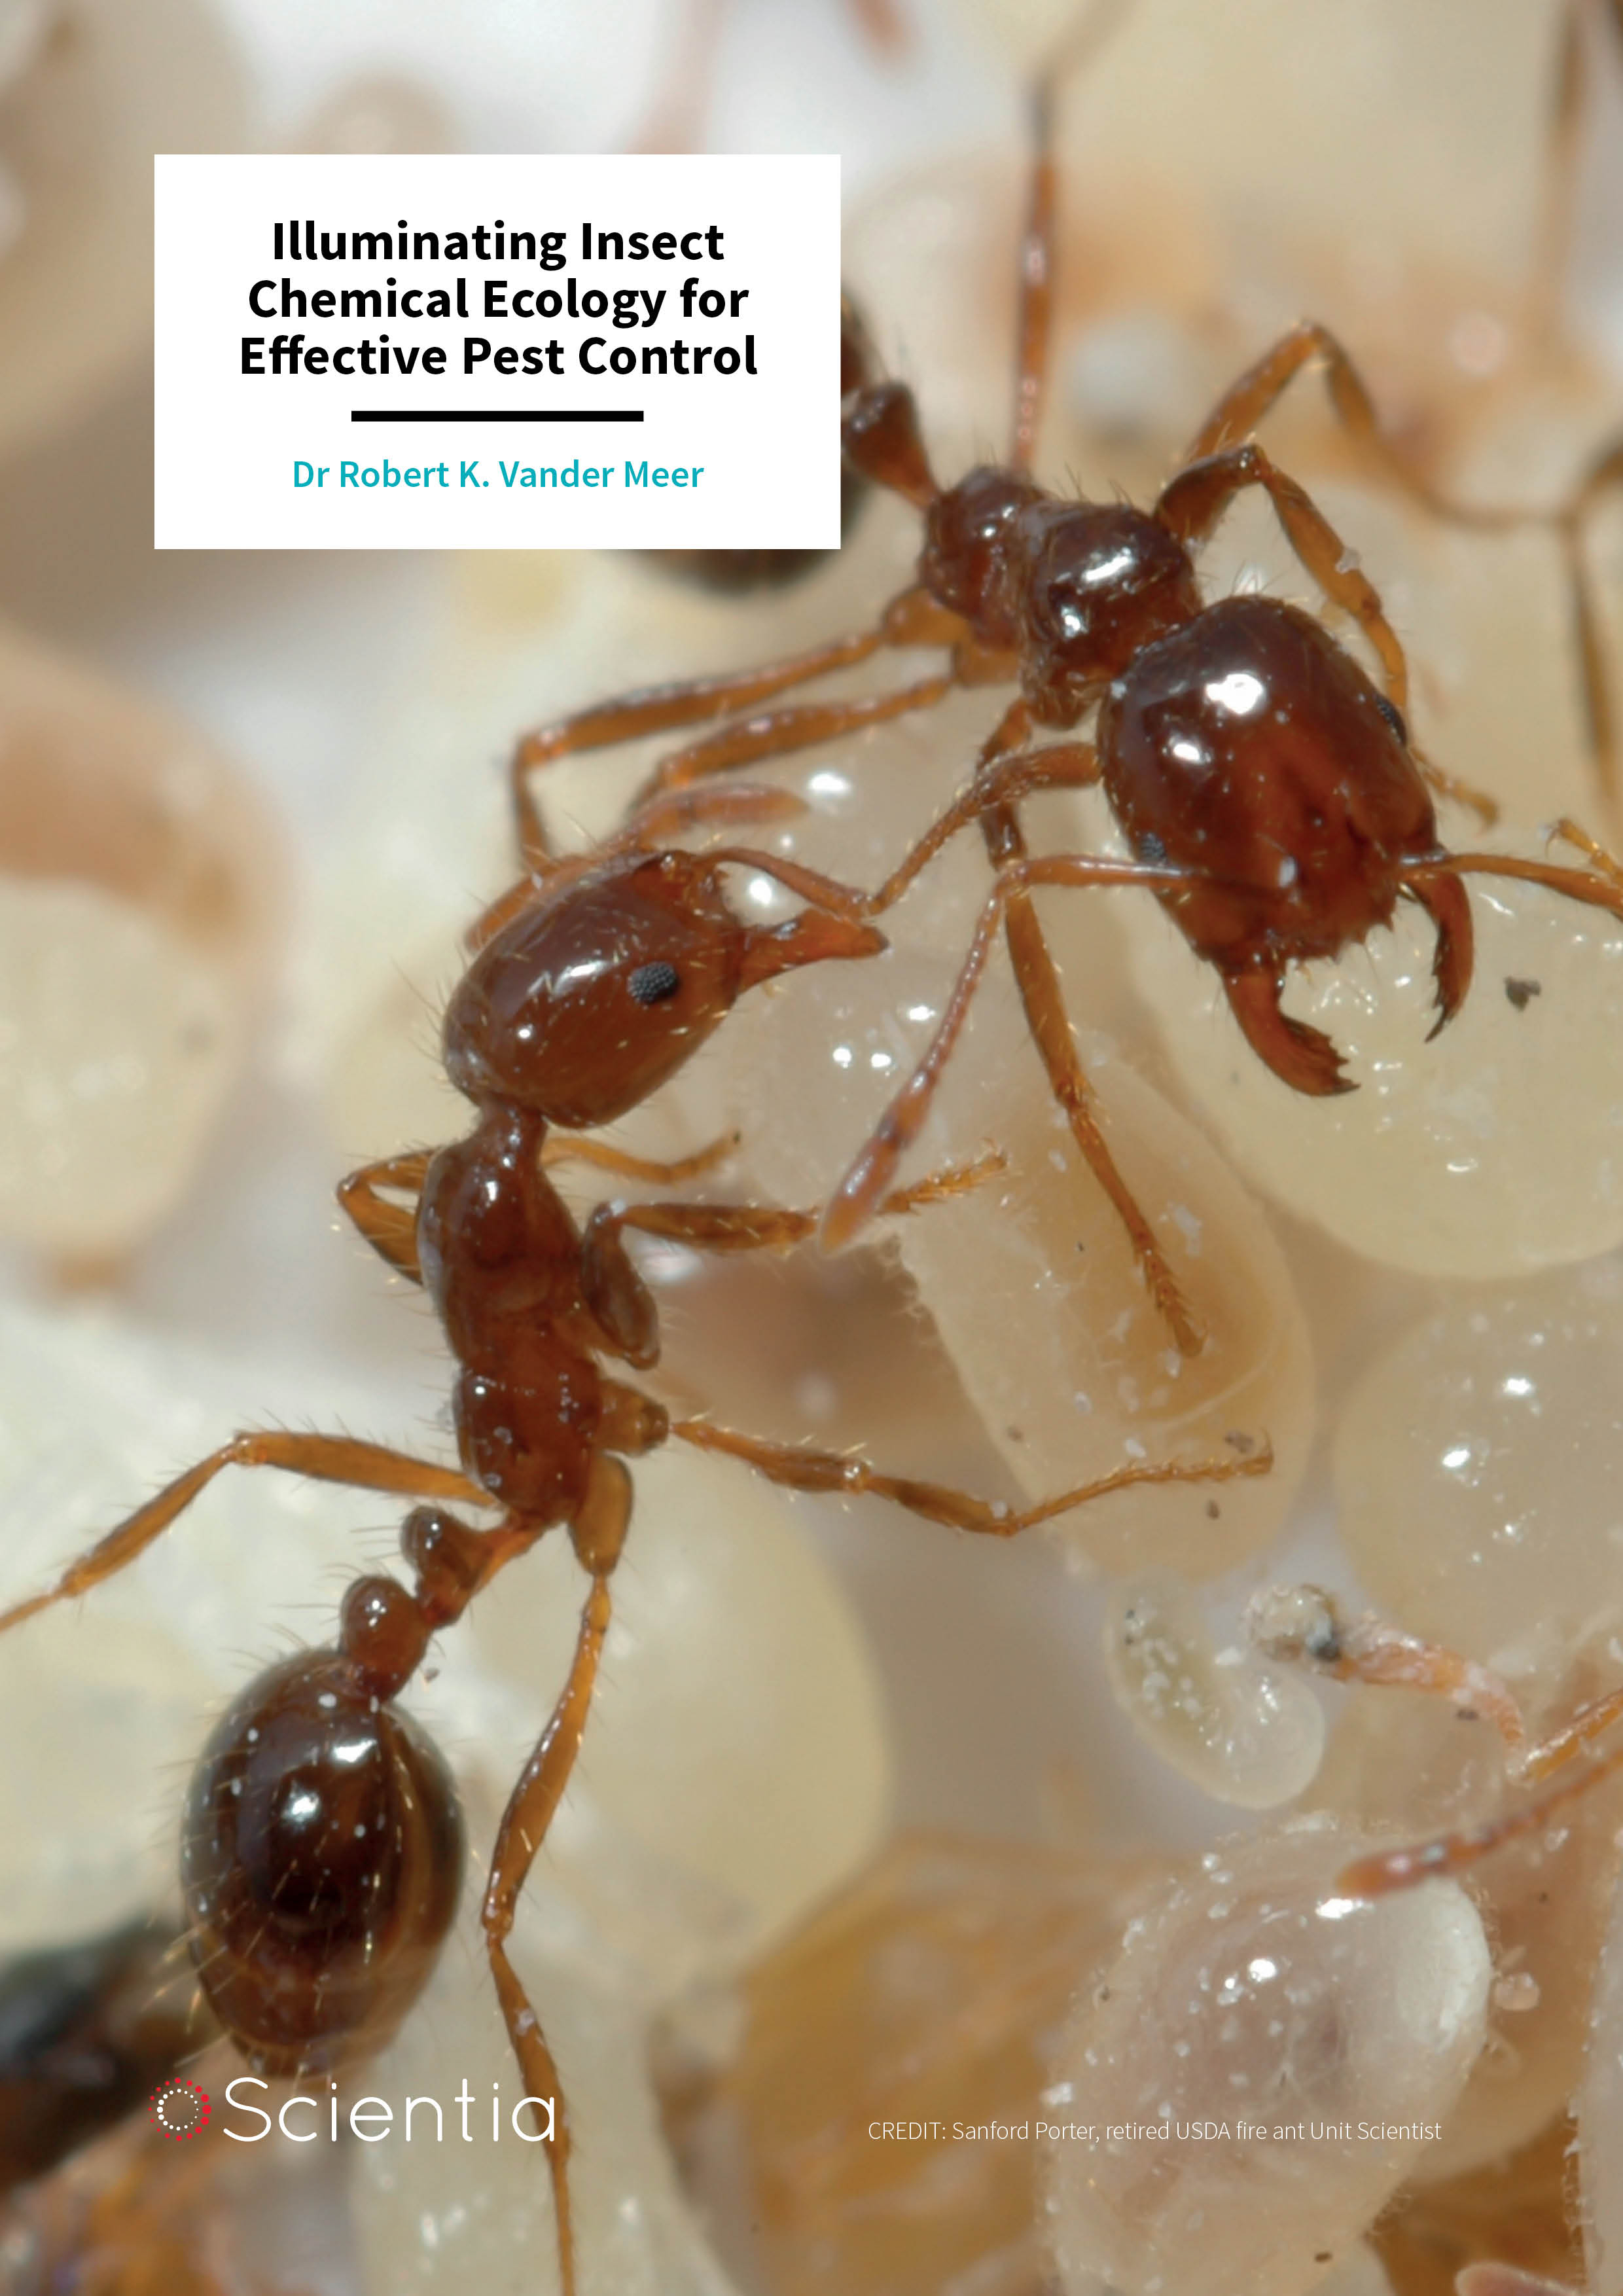 Dr Robert K. Vander Meer – Illuminating Insect Chemical Ecology for Effective Pest Control